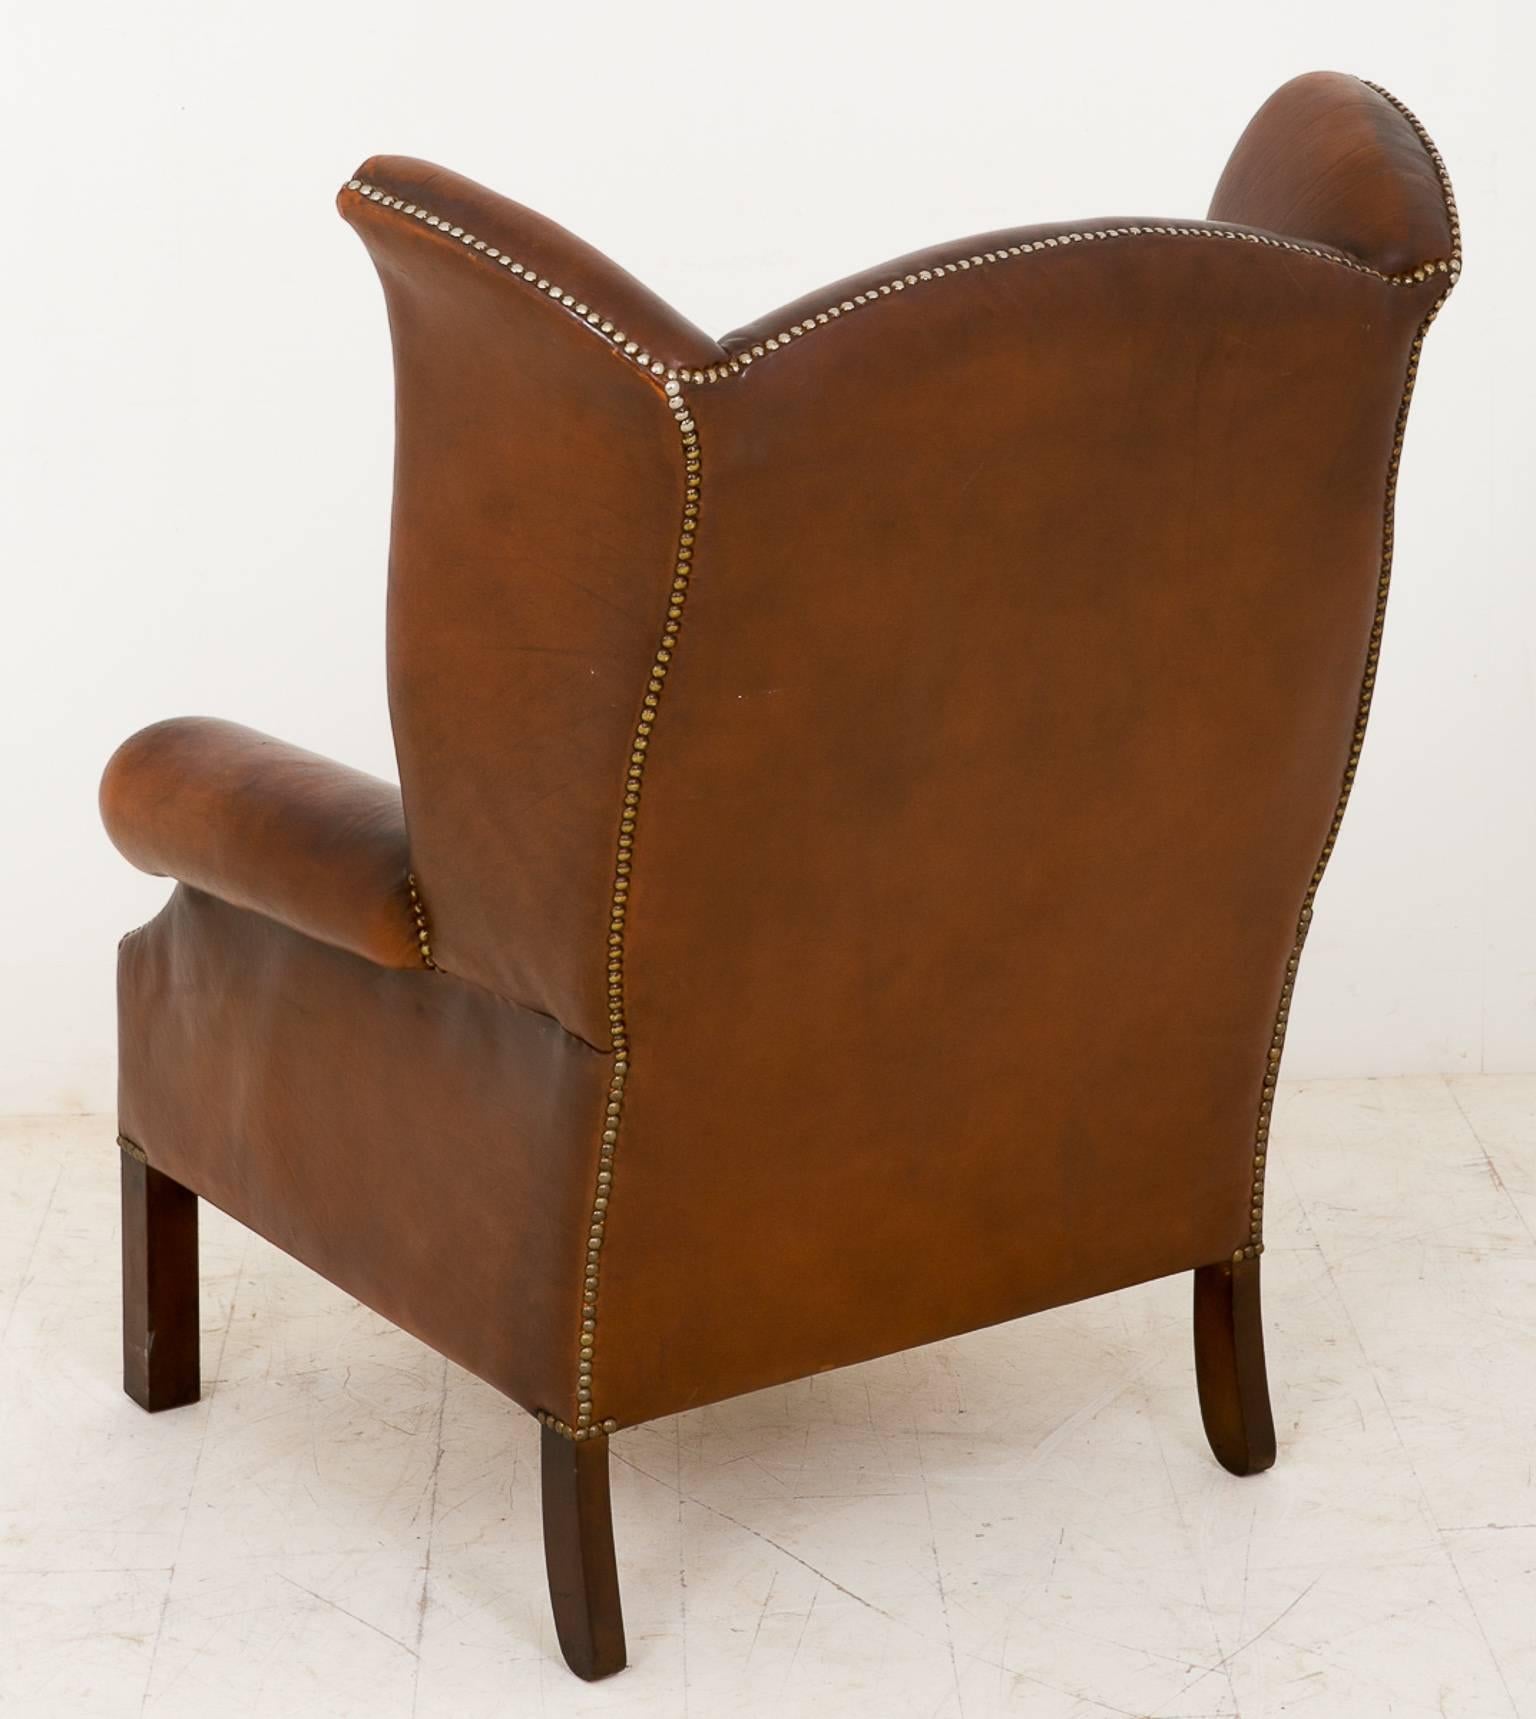 Pair of leather wing chairs with Georgian influences.
Standing on square mahogany legs.
The leather work having brass stud work.
These chairs are extremely comfortable.

Size:

Height 42" (79cm)
Width 31" (79cm)
Depth 25"